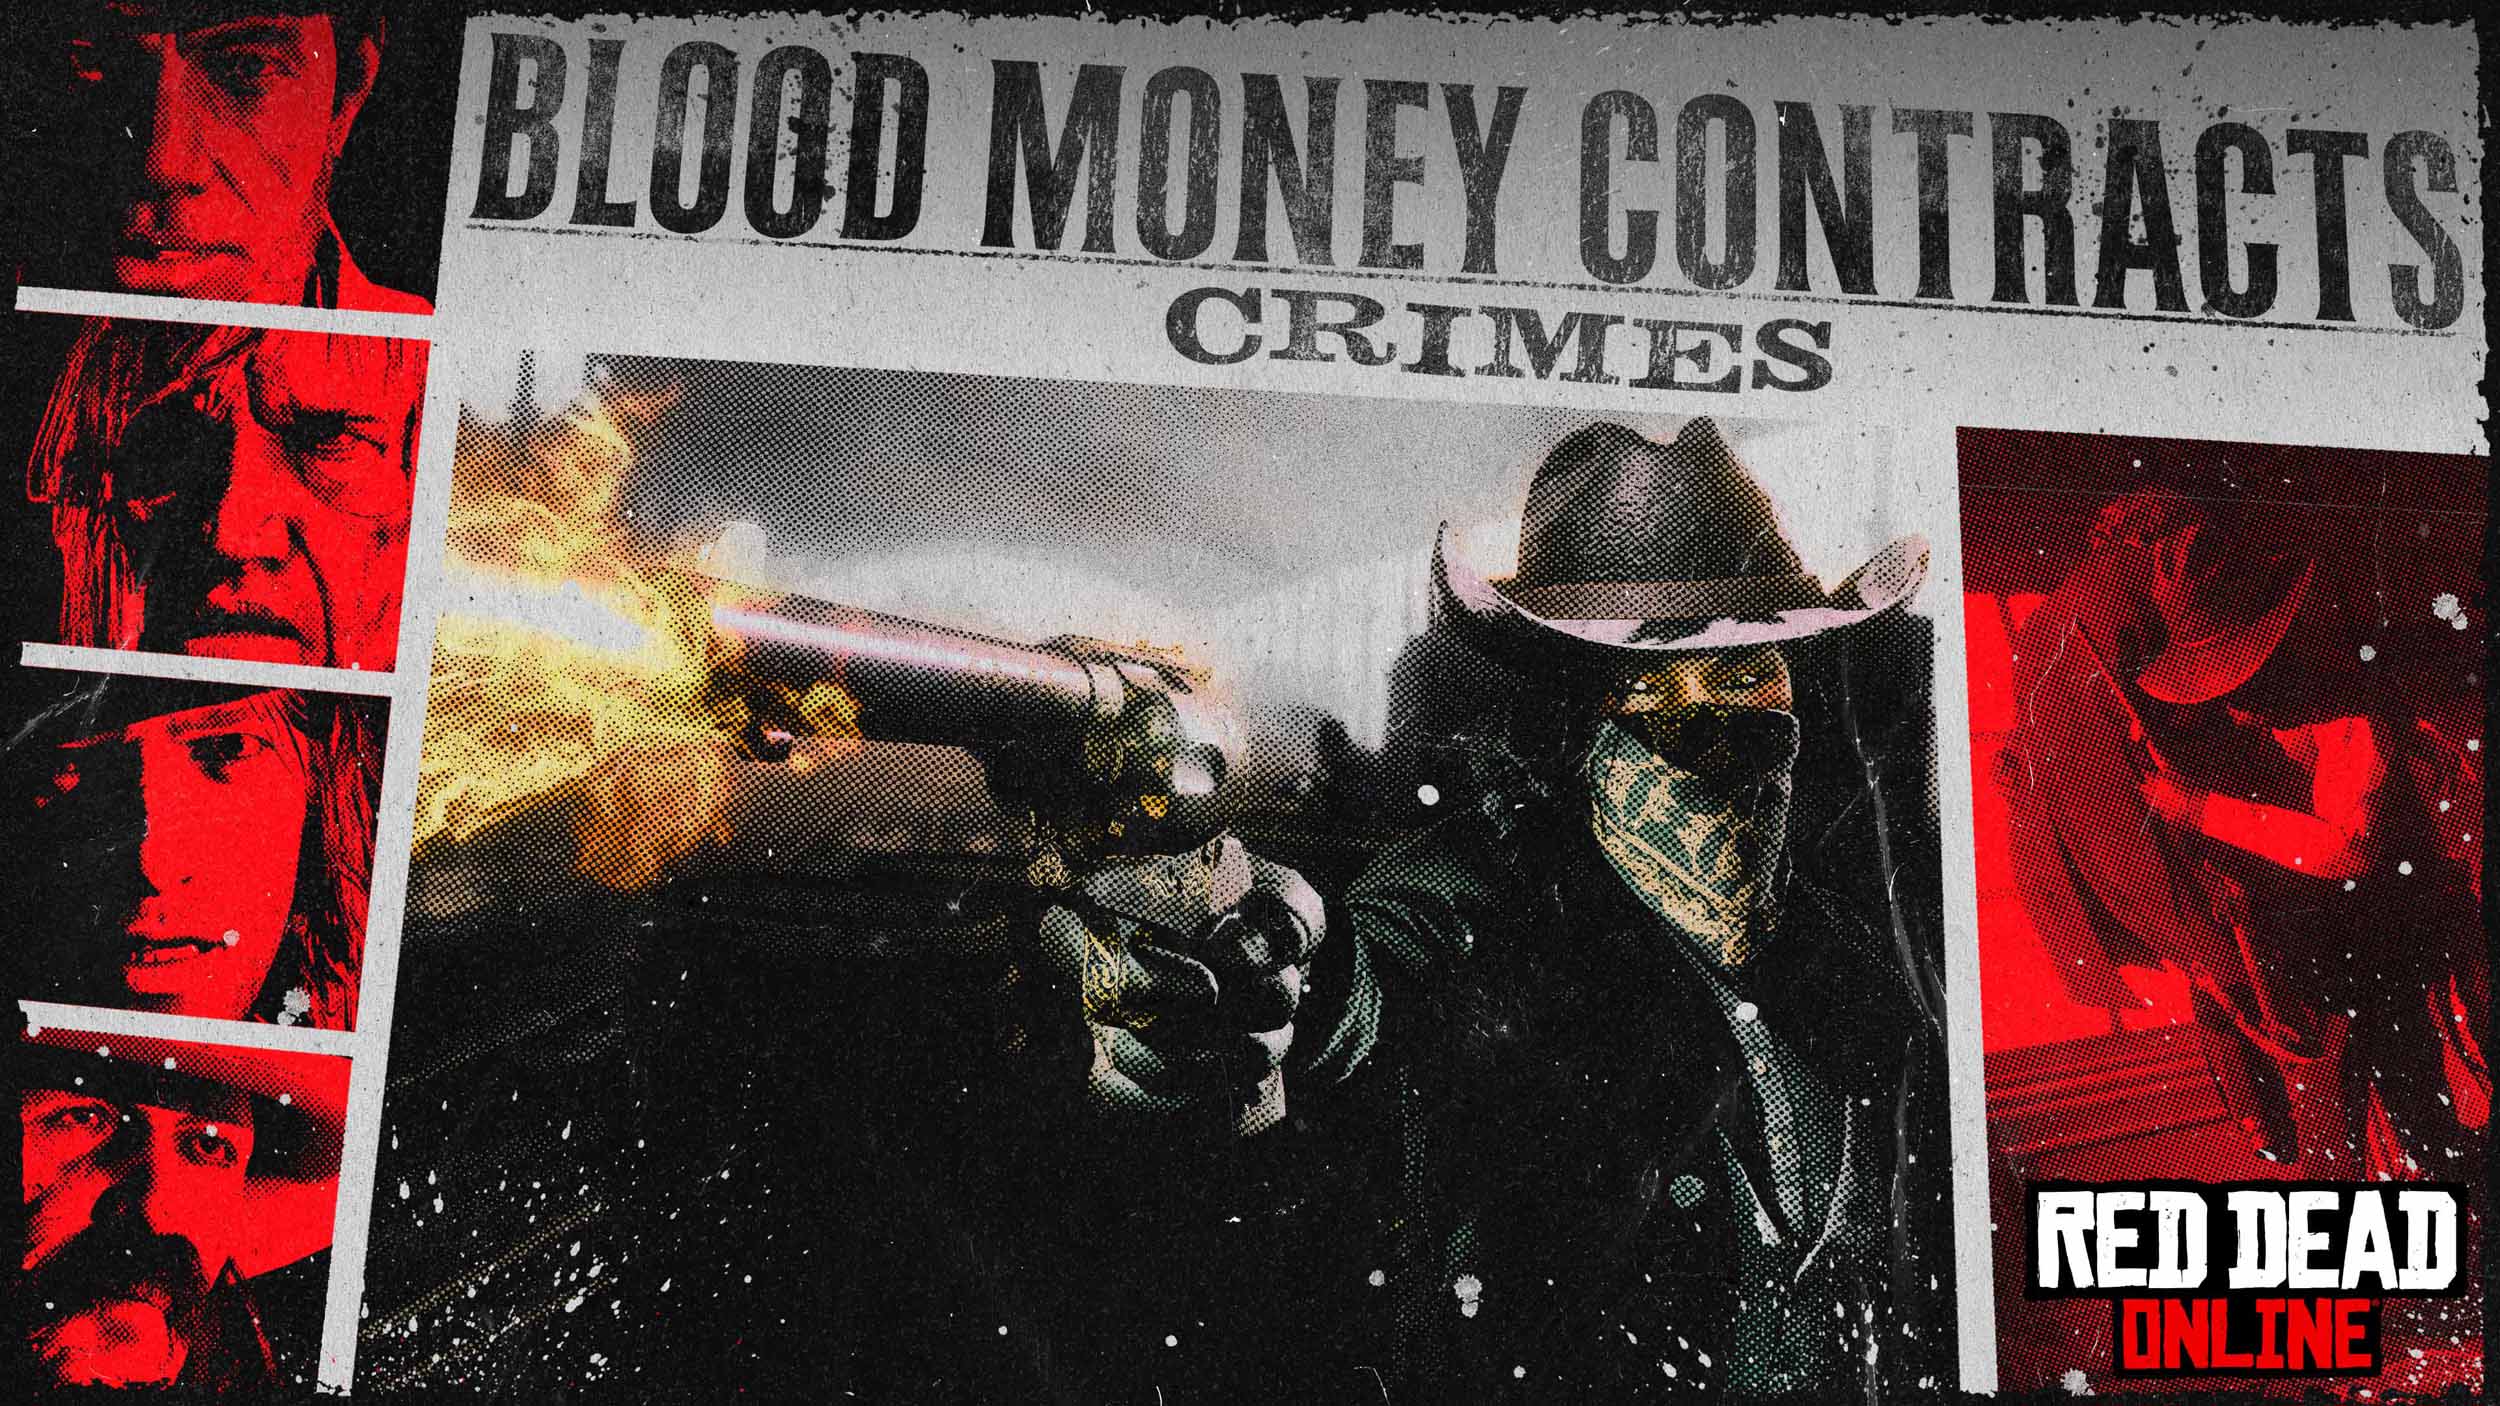 Red Dead Online: Bonuses and Rewards on Blood Money Contracts &amp; more